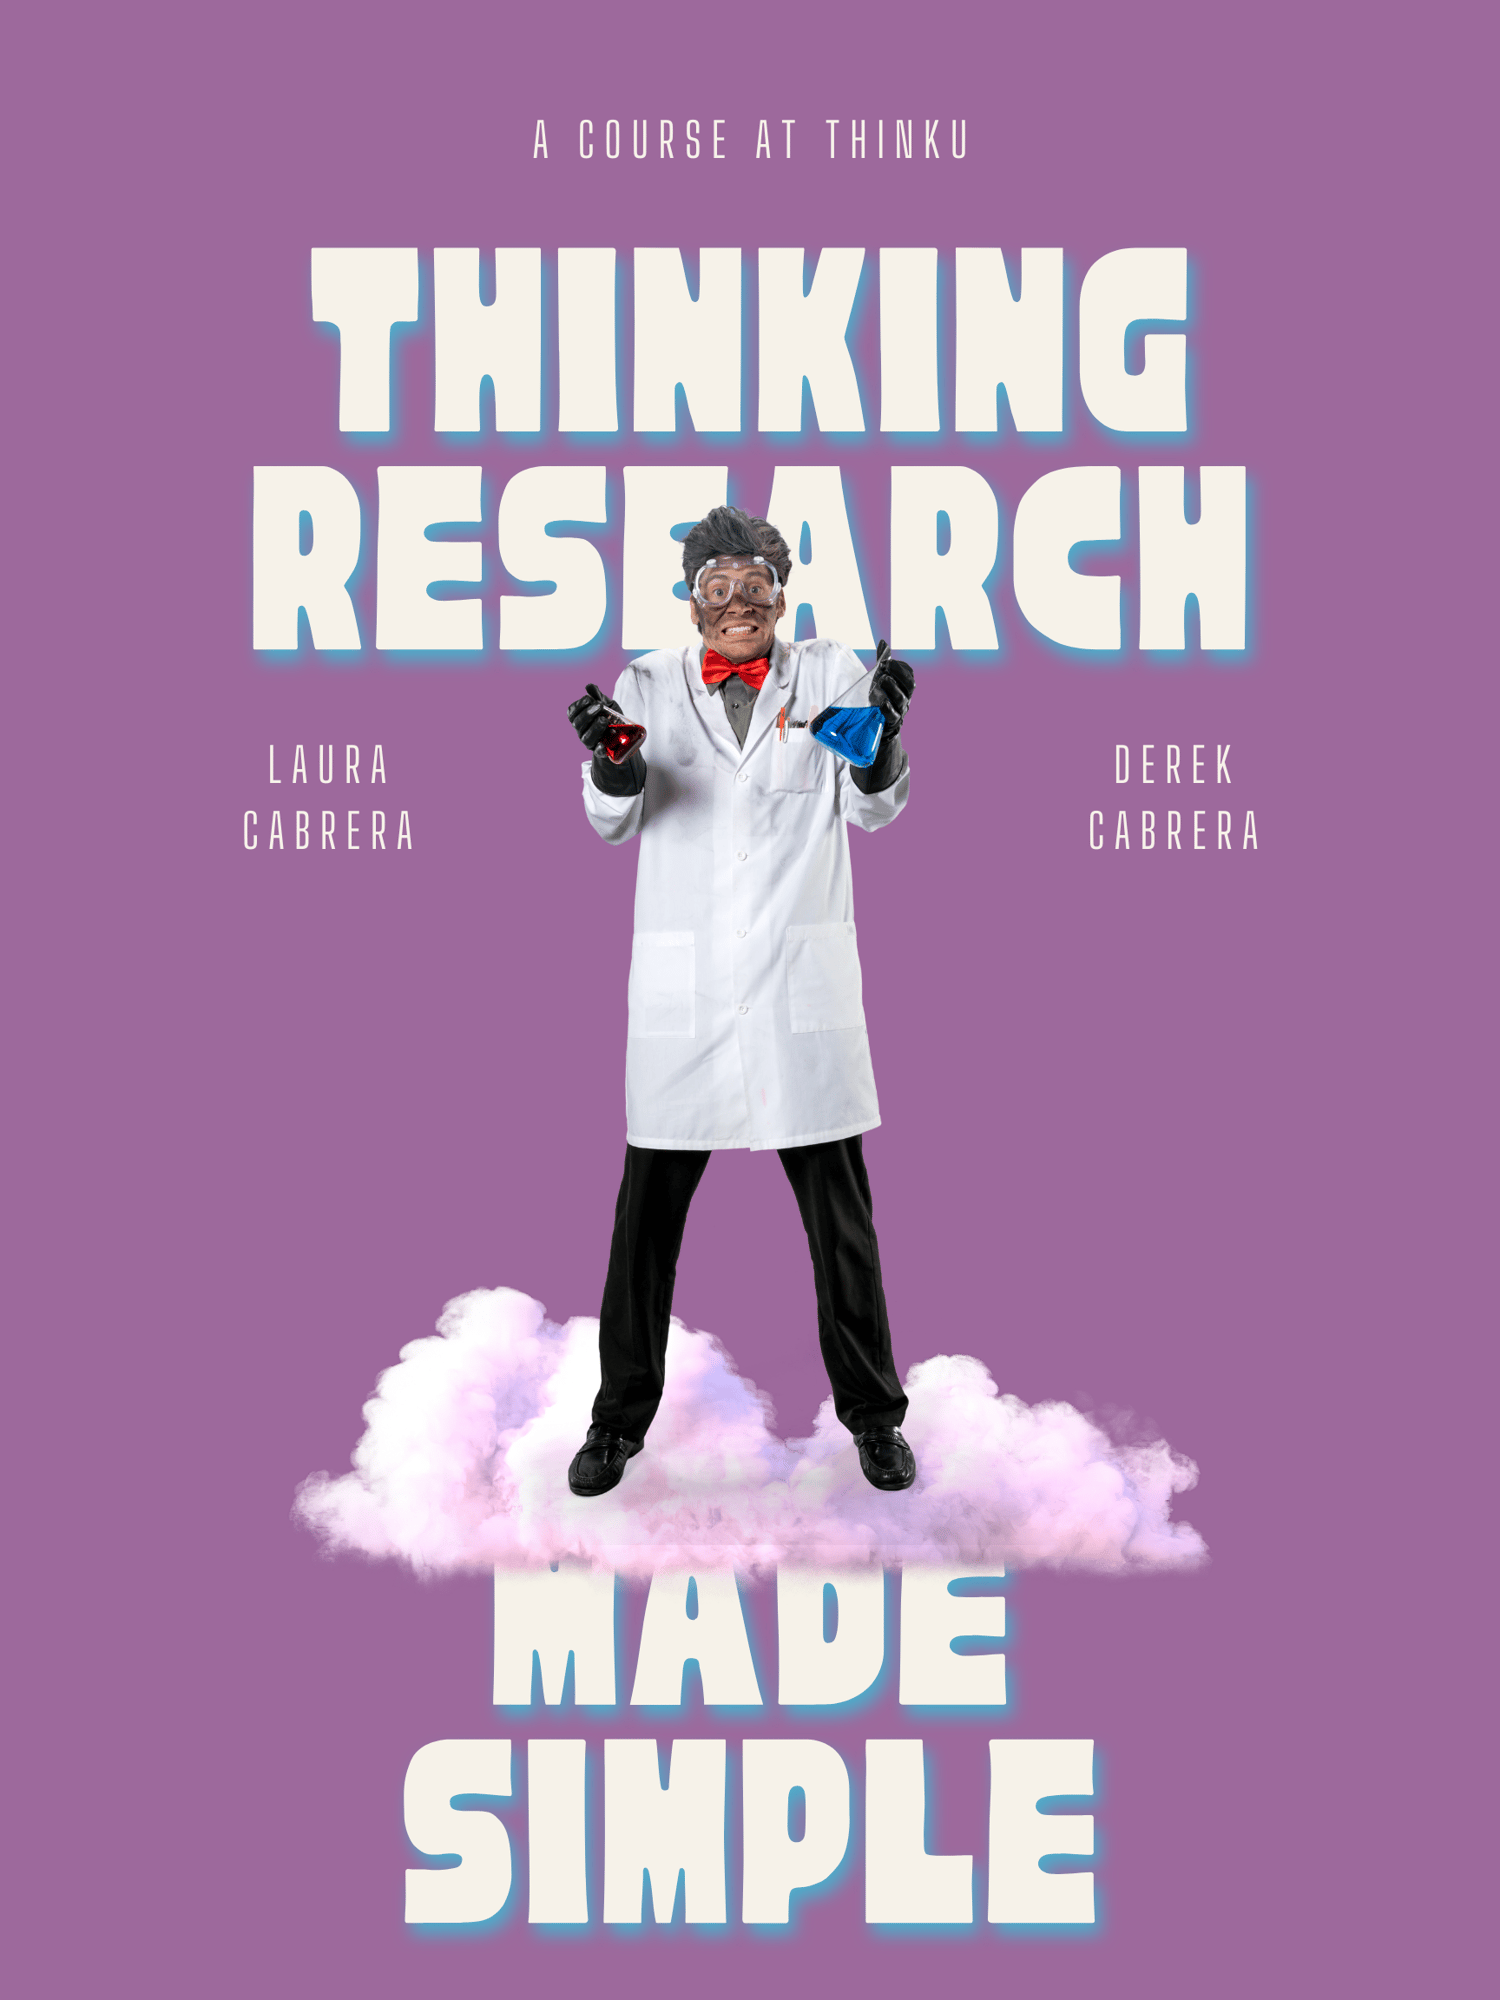 Thinking Research made simple